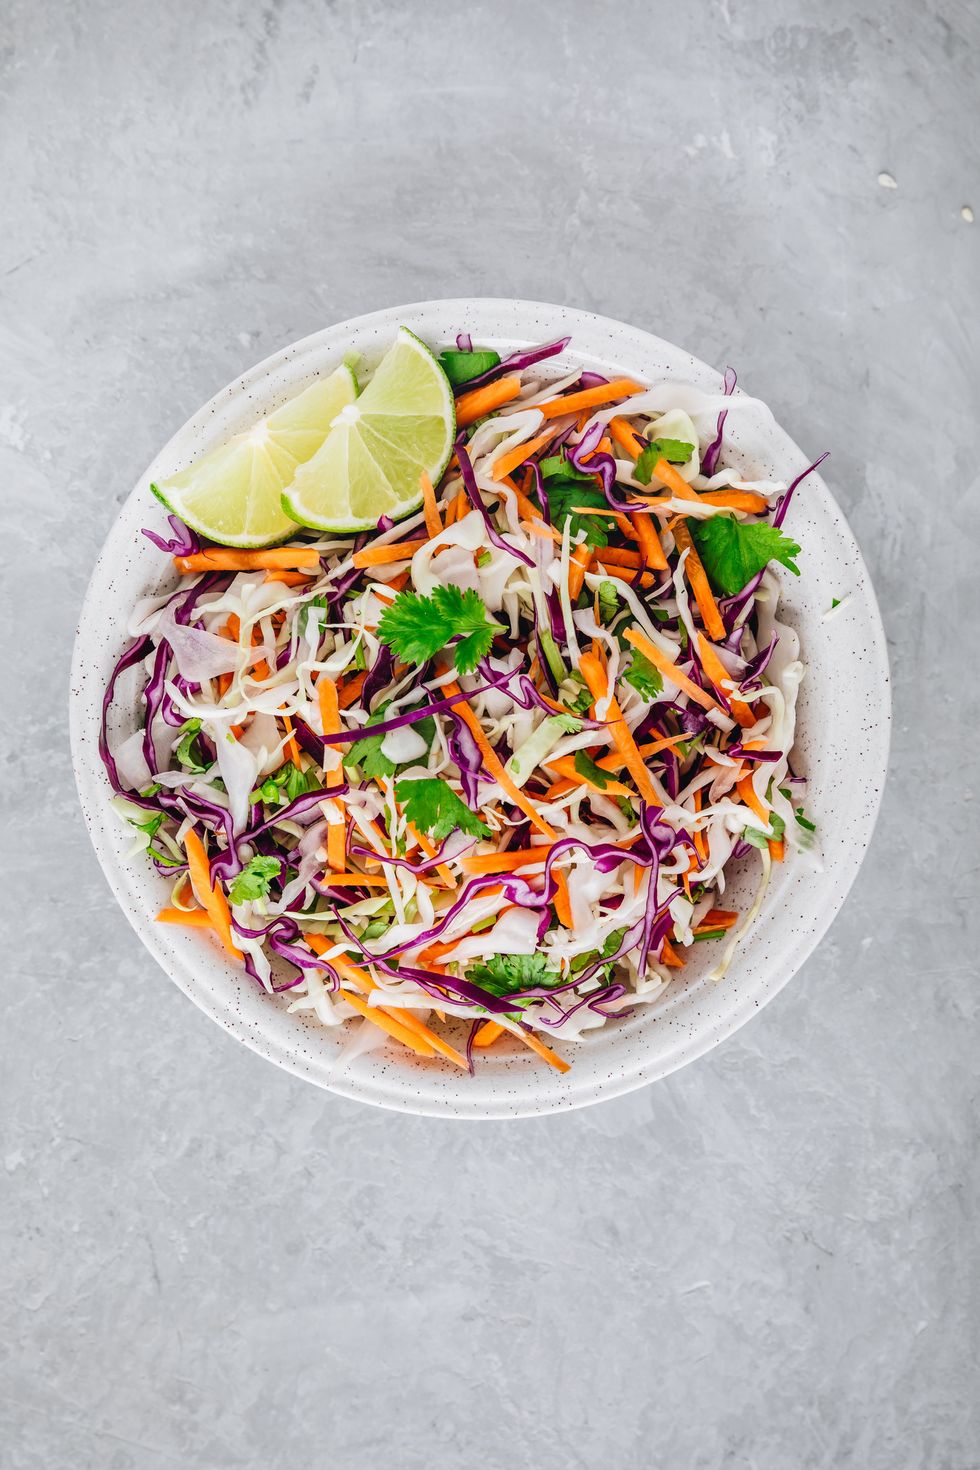 cilantro lime coleslaw salad with red and white cabbage on stone background